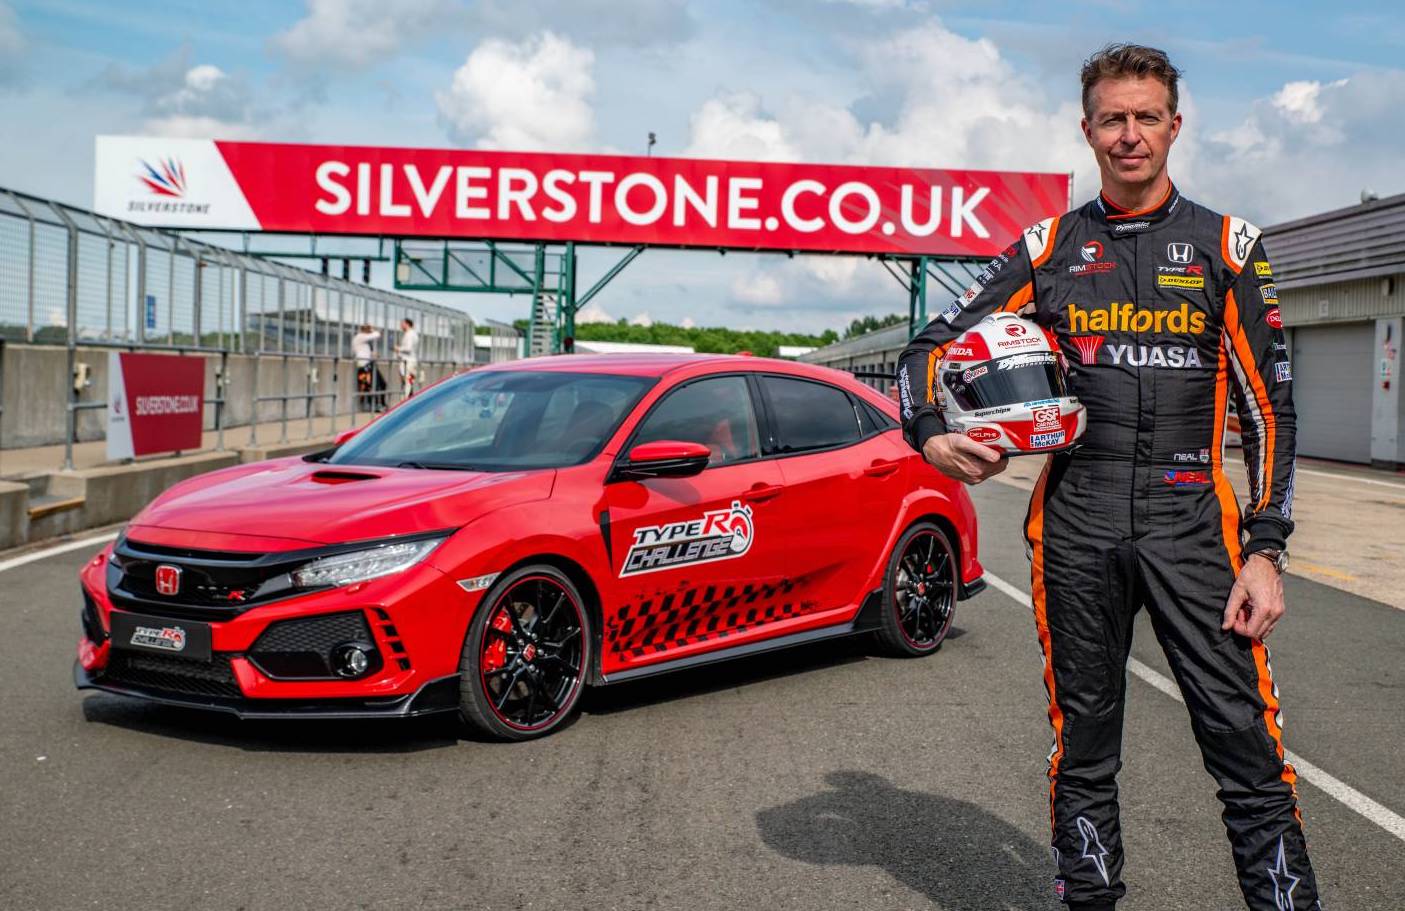 Honda Civic Type R sets FWD lap record at Silverstone, more records to tumble